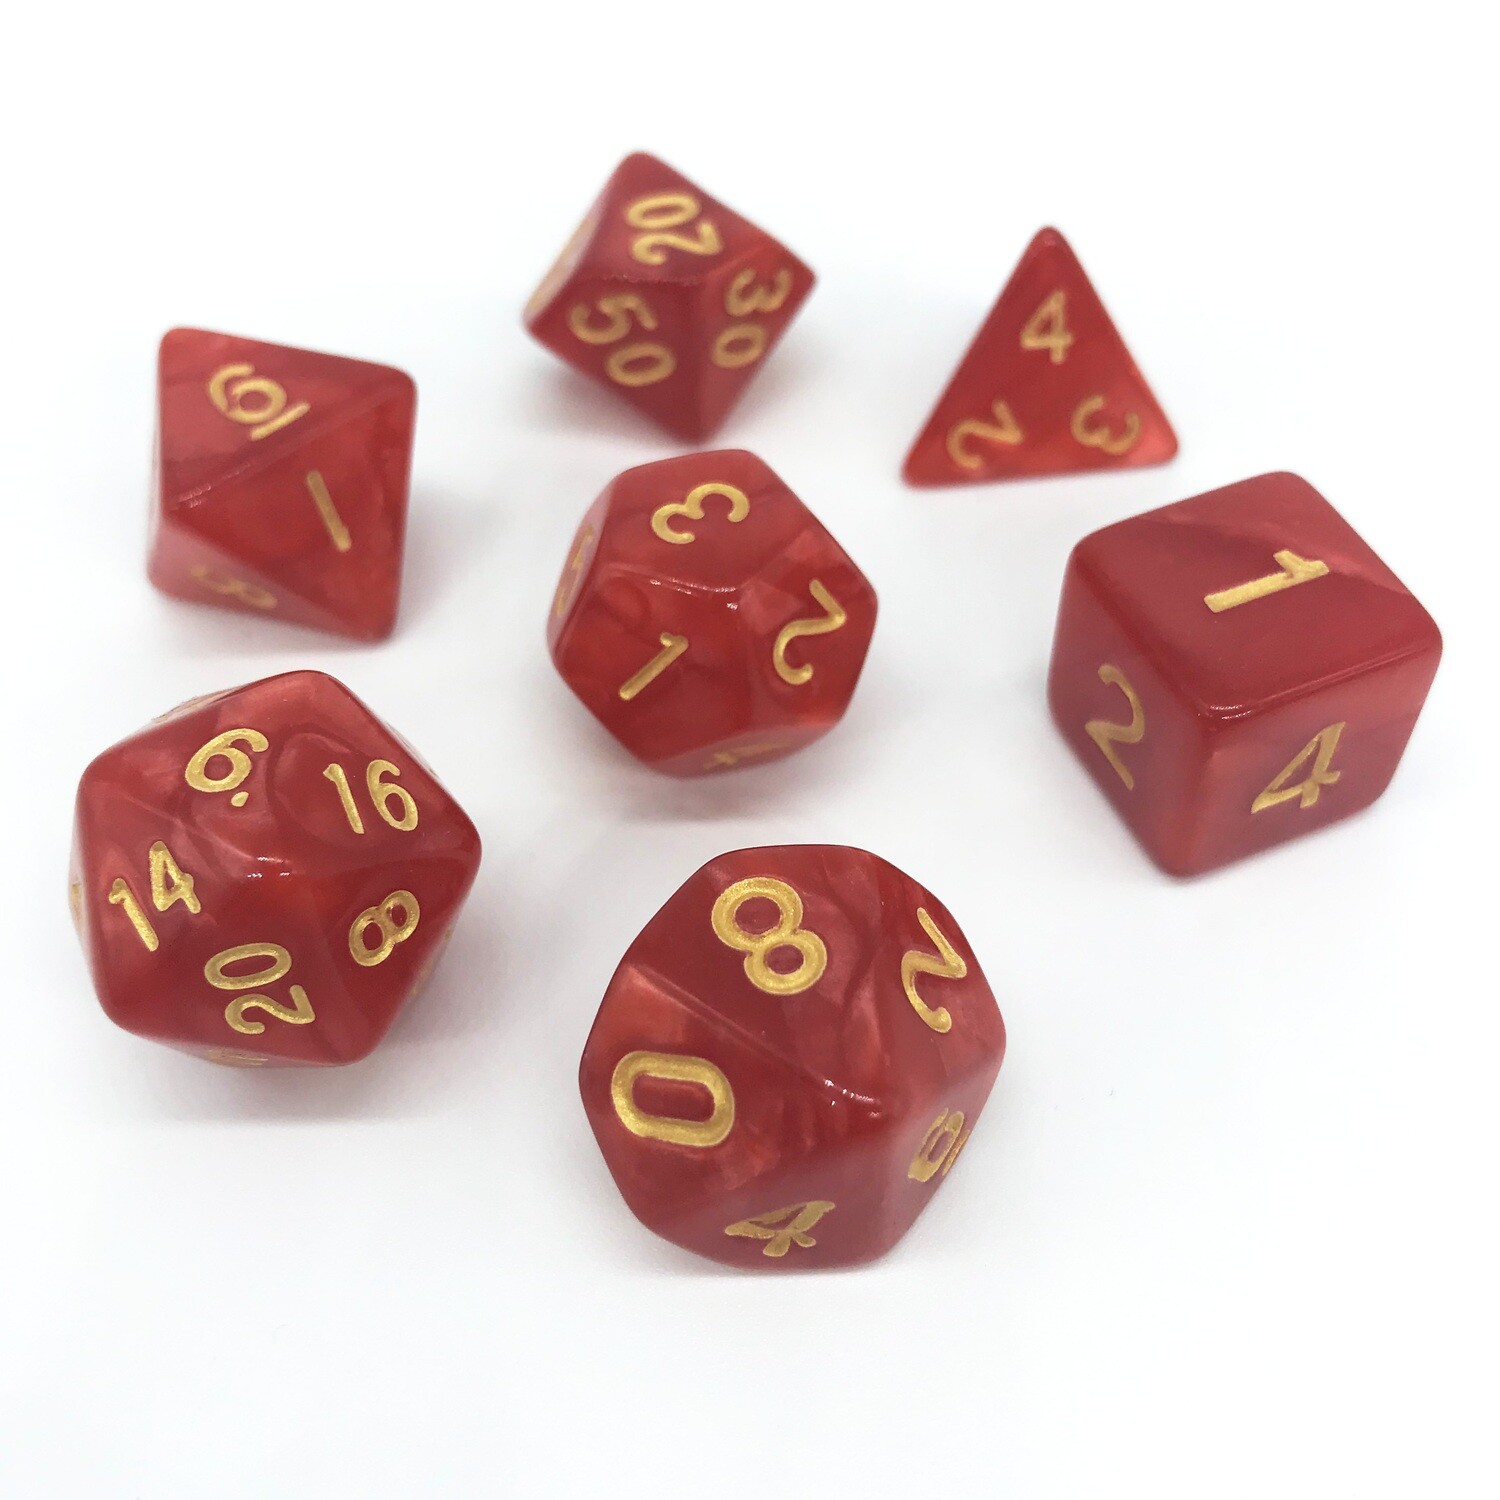 Dice Set - Red marbled with gold numbers